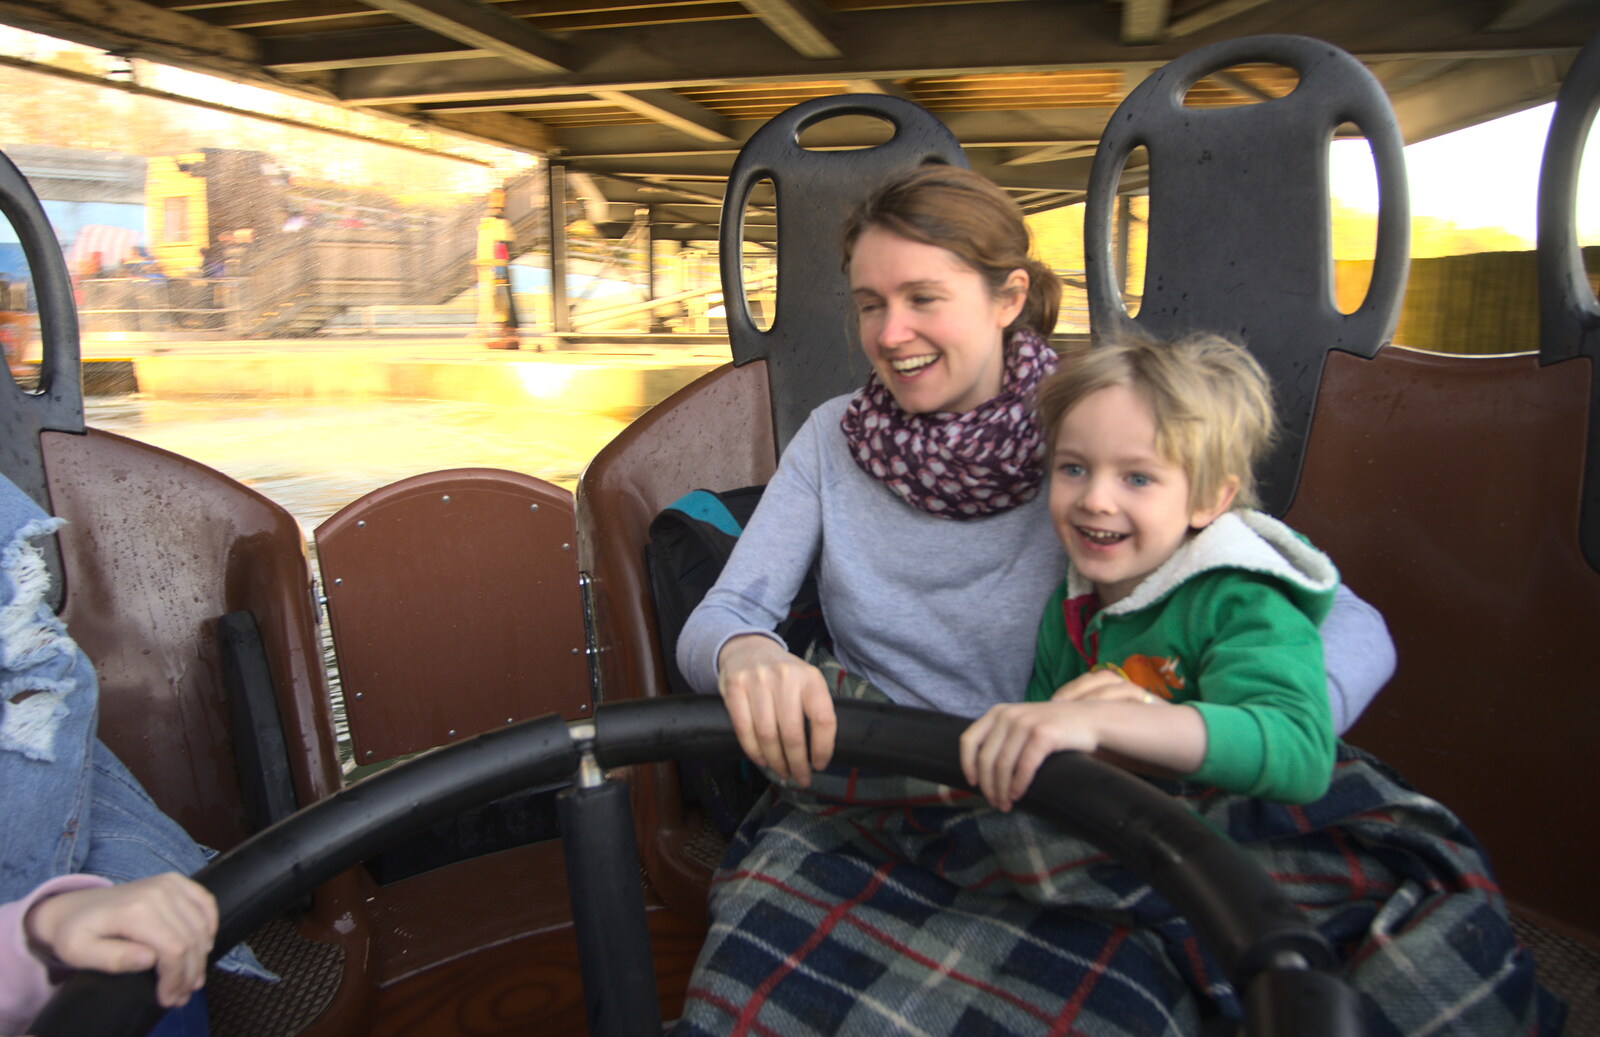 Isobel and Harry on the Viking water ride from A Trip to Legoland, Windsor, Berkshire - 25th March 2017